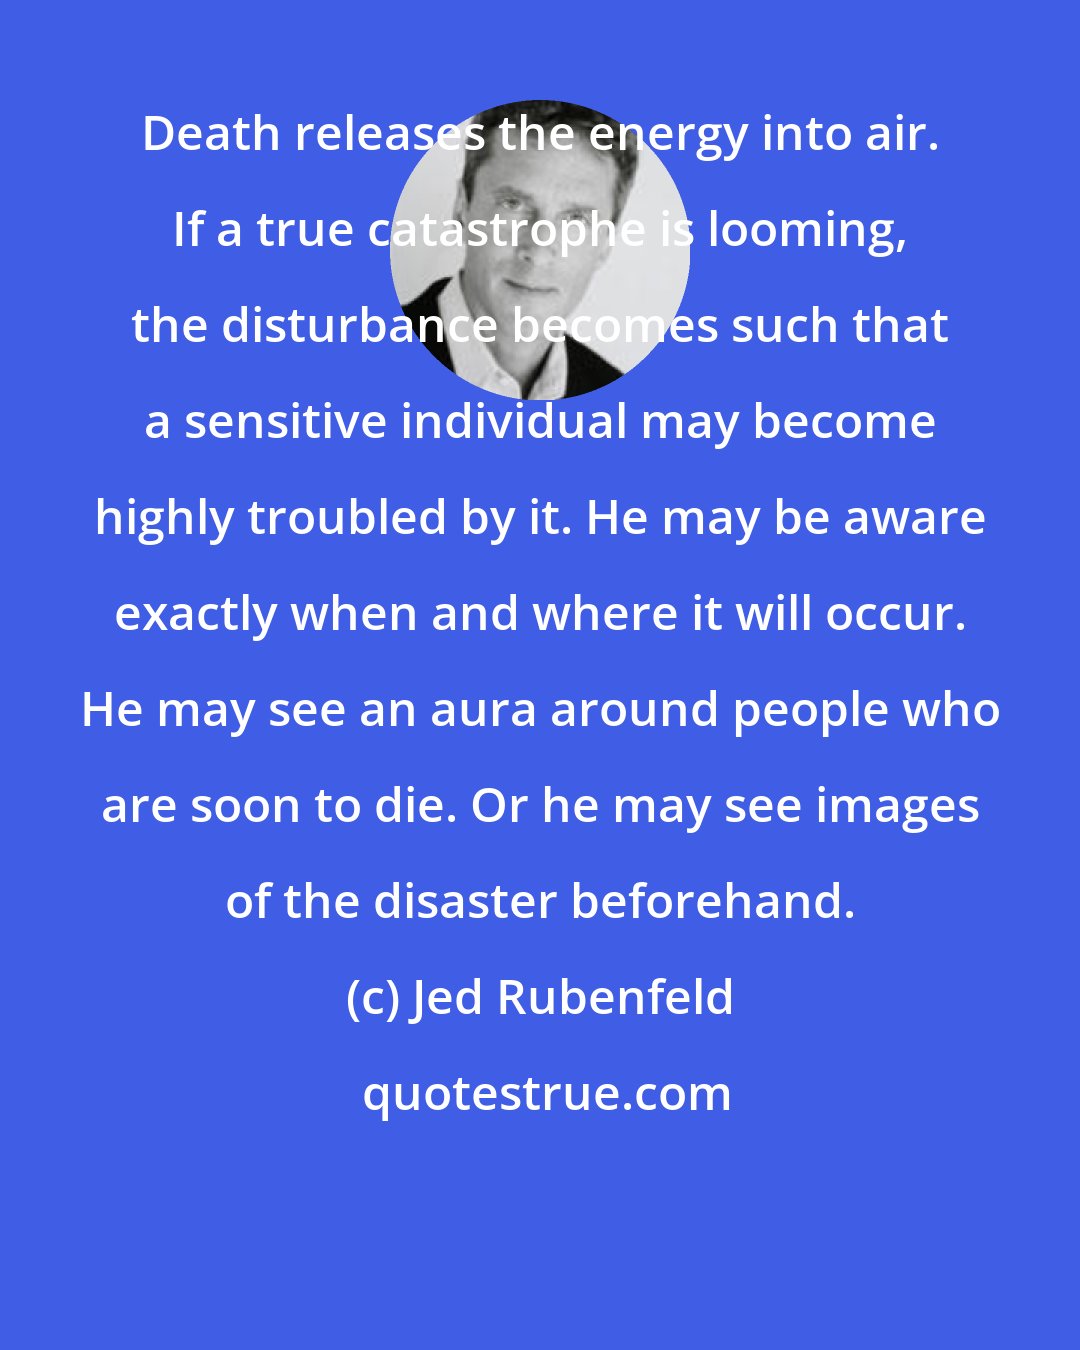 Jed Rubenfeld: Death releases the energy into air. If a true catastrophe is looming, the disturbance becomes such that a sensitive individual may become highly troubled by it. He may be aware exactly when and where it will occur. He may see an aura around people who are soon to die. Or he may see images of the disaster beforehand.